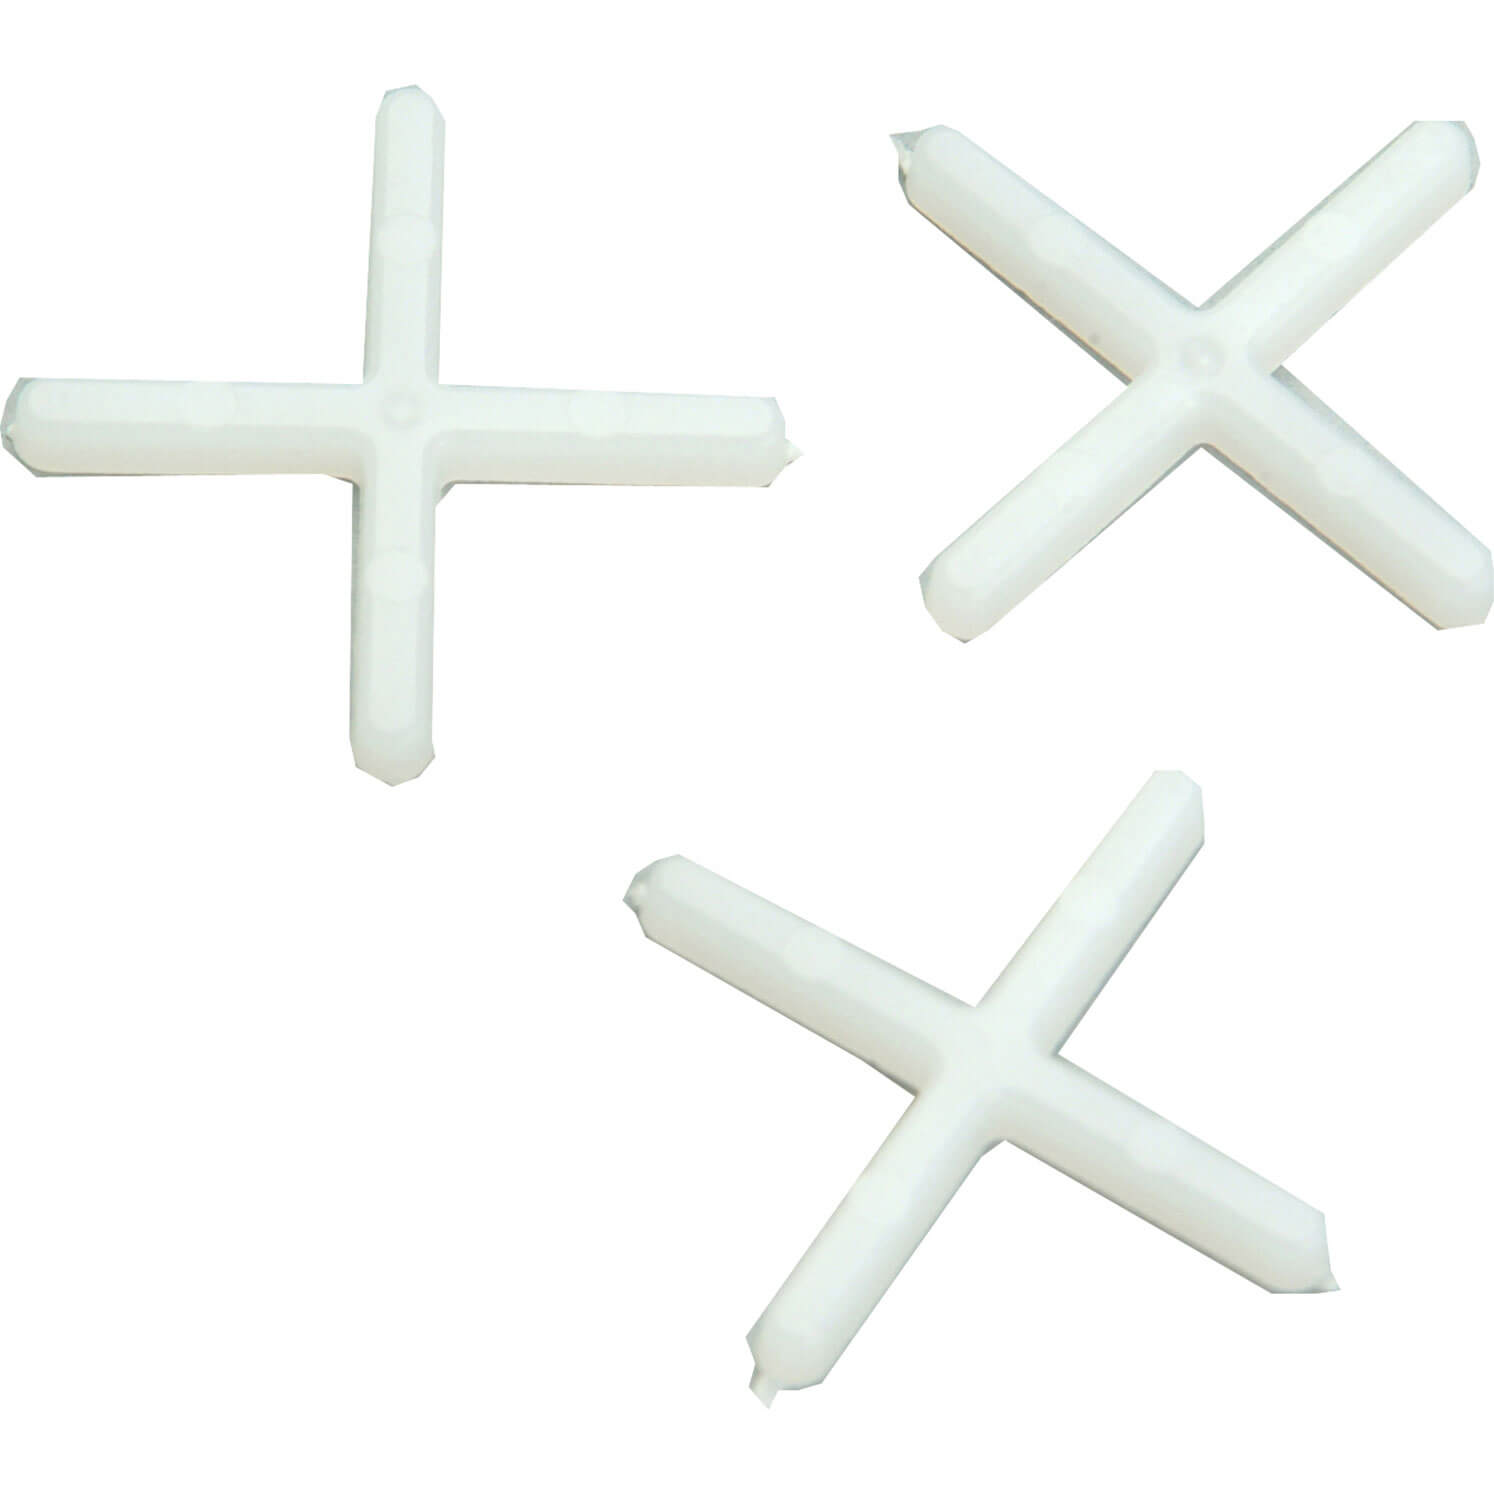 Vitrex 10 2155 Wall Tile Spacers 1.5mm Pack of 5000